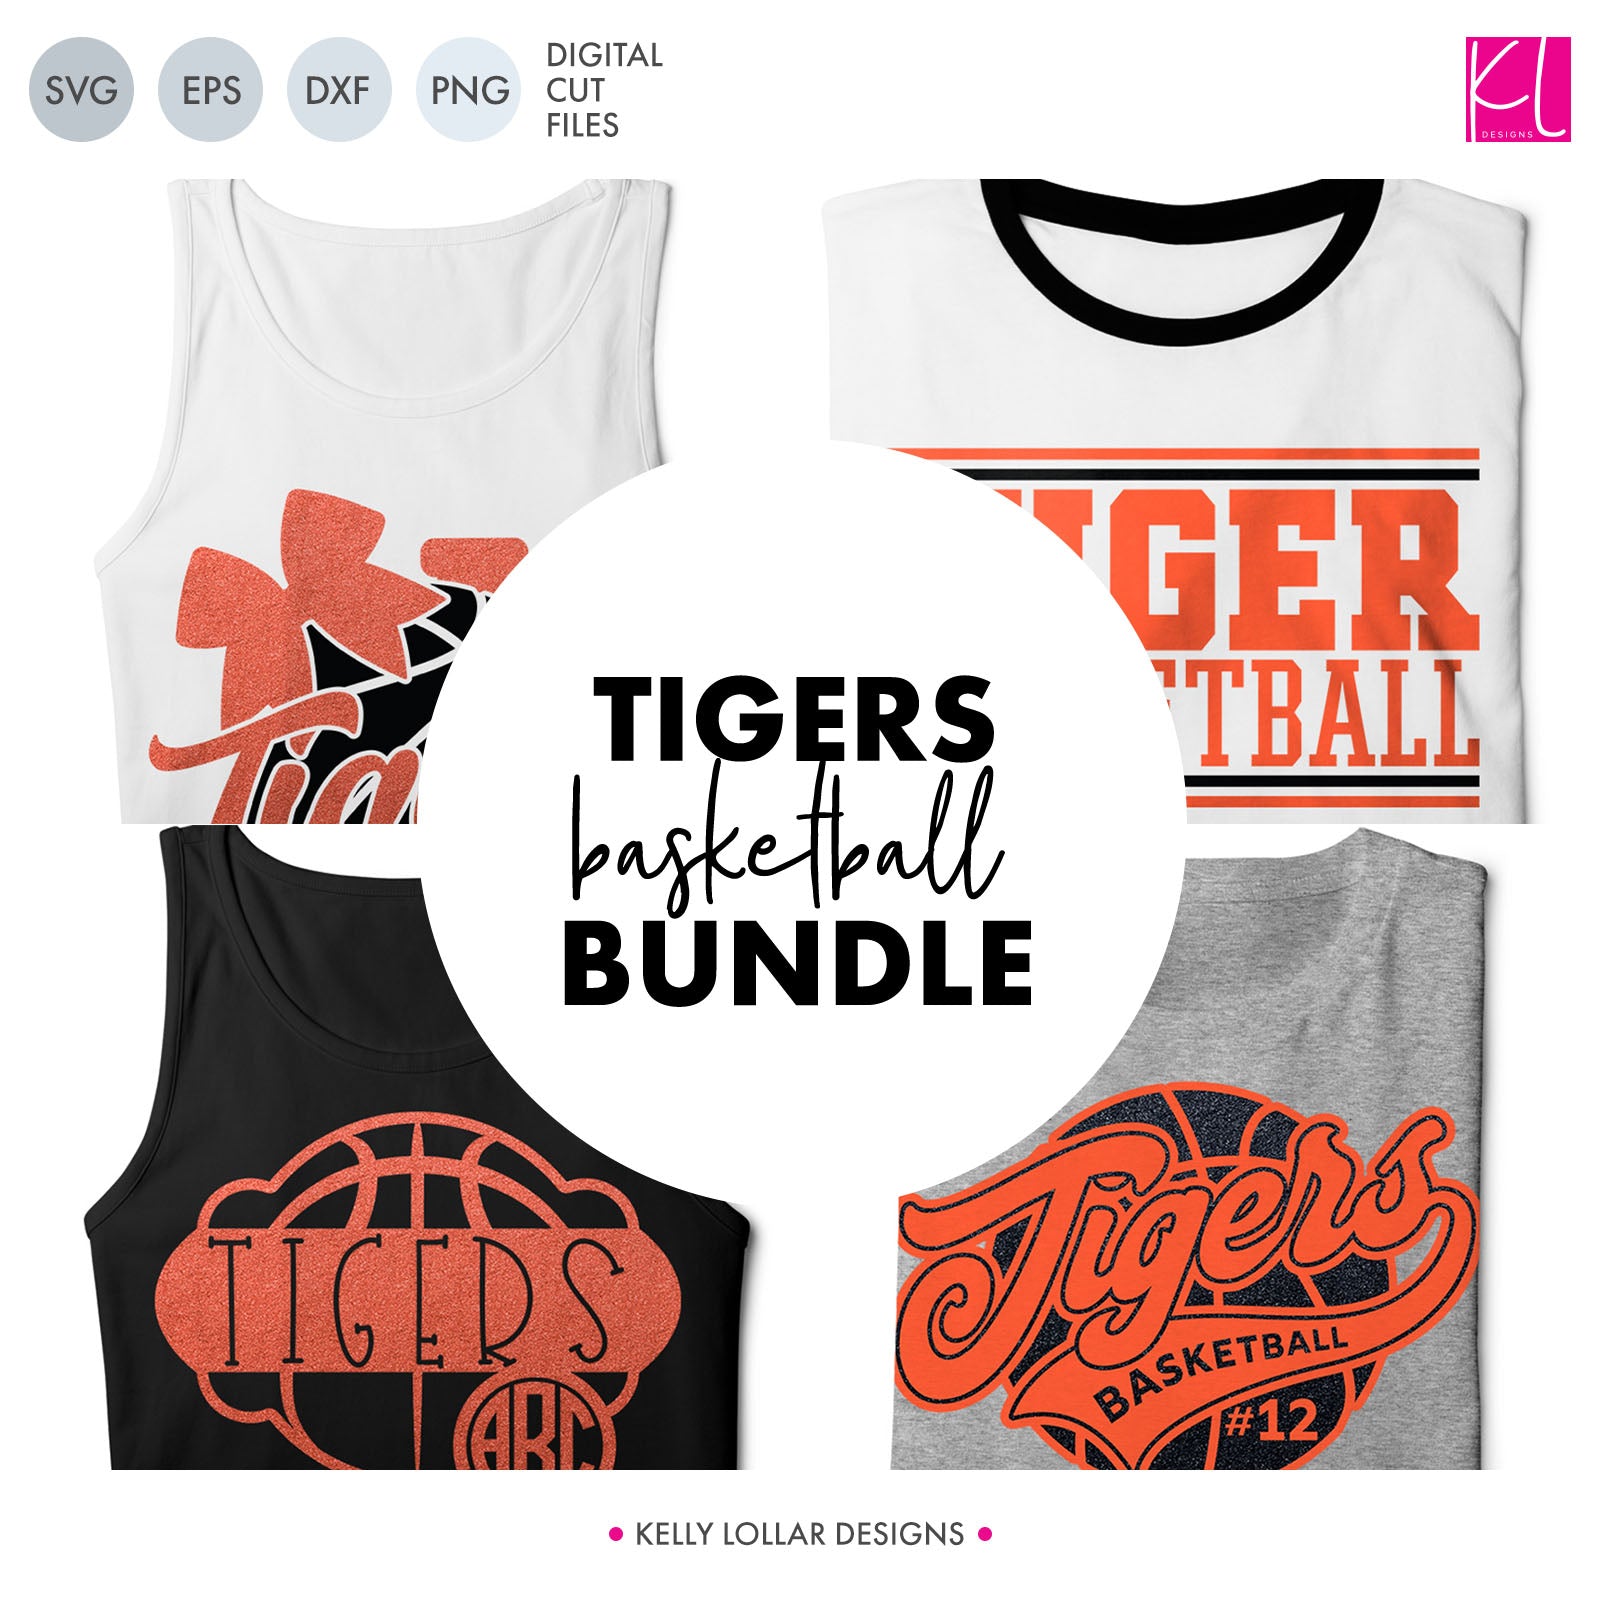 Tigers Basketball Bundle  SVG DXF EPS PNG Cut Files - Kelly